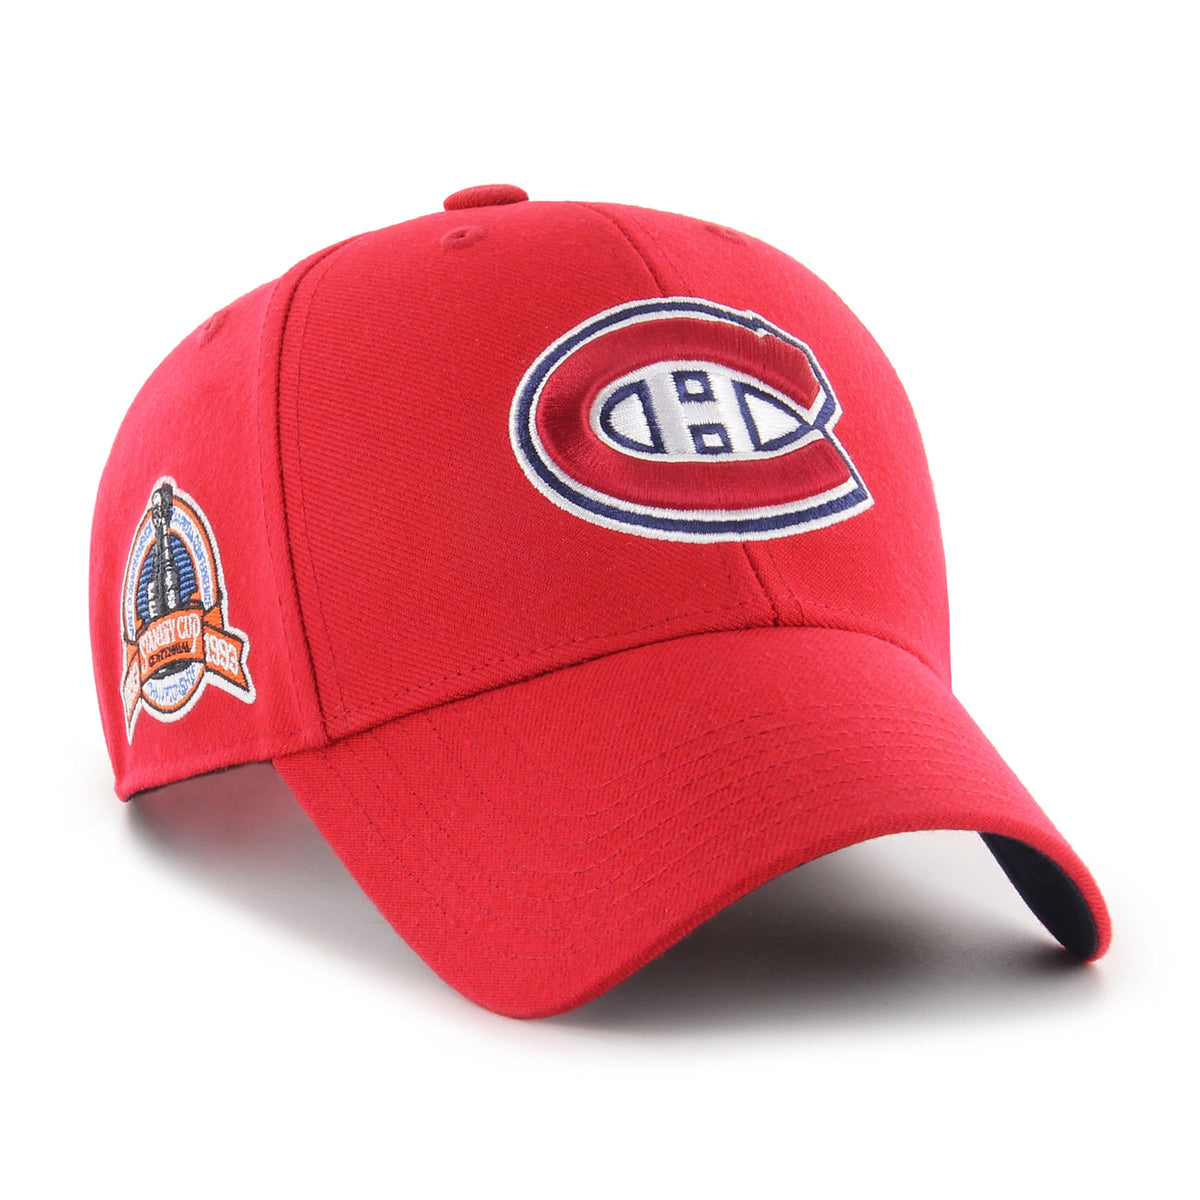 Vintage Montreal Canadiens The Game Stanley Cup Champions Snapback